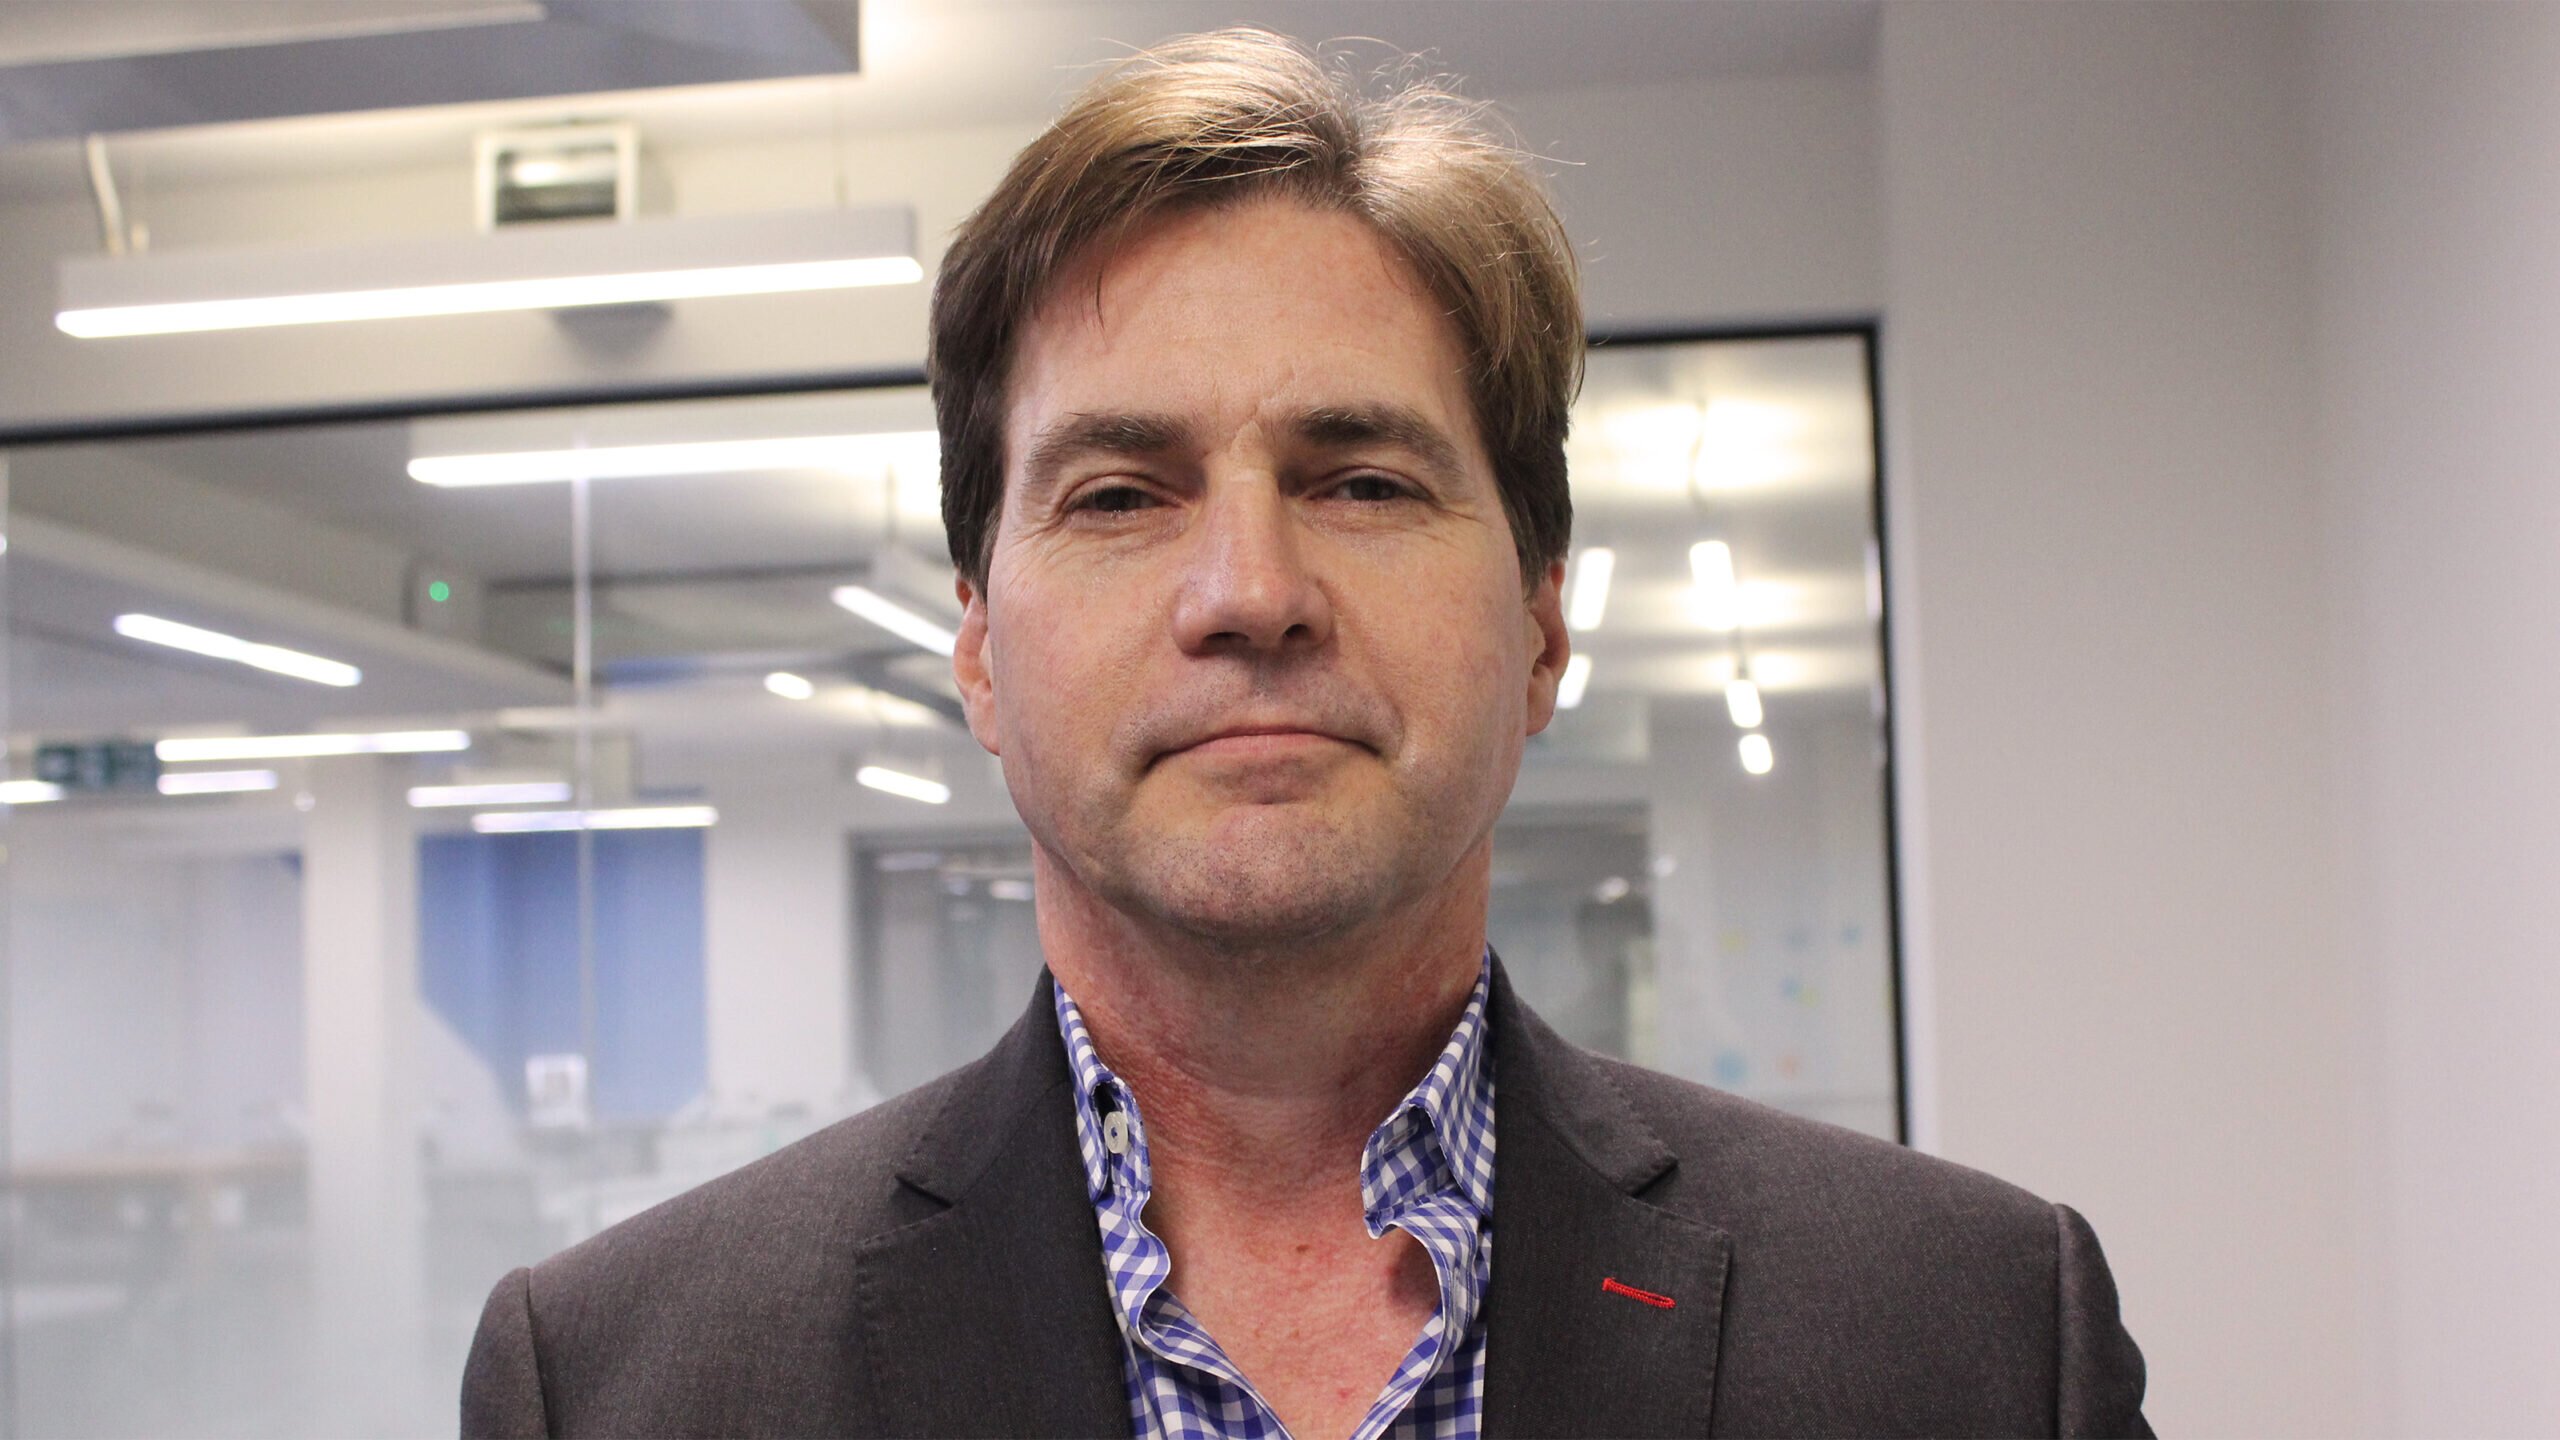 Has Craig Wright Finally Given Up His Campaign to Claim Bitcoin Was His Idea?